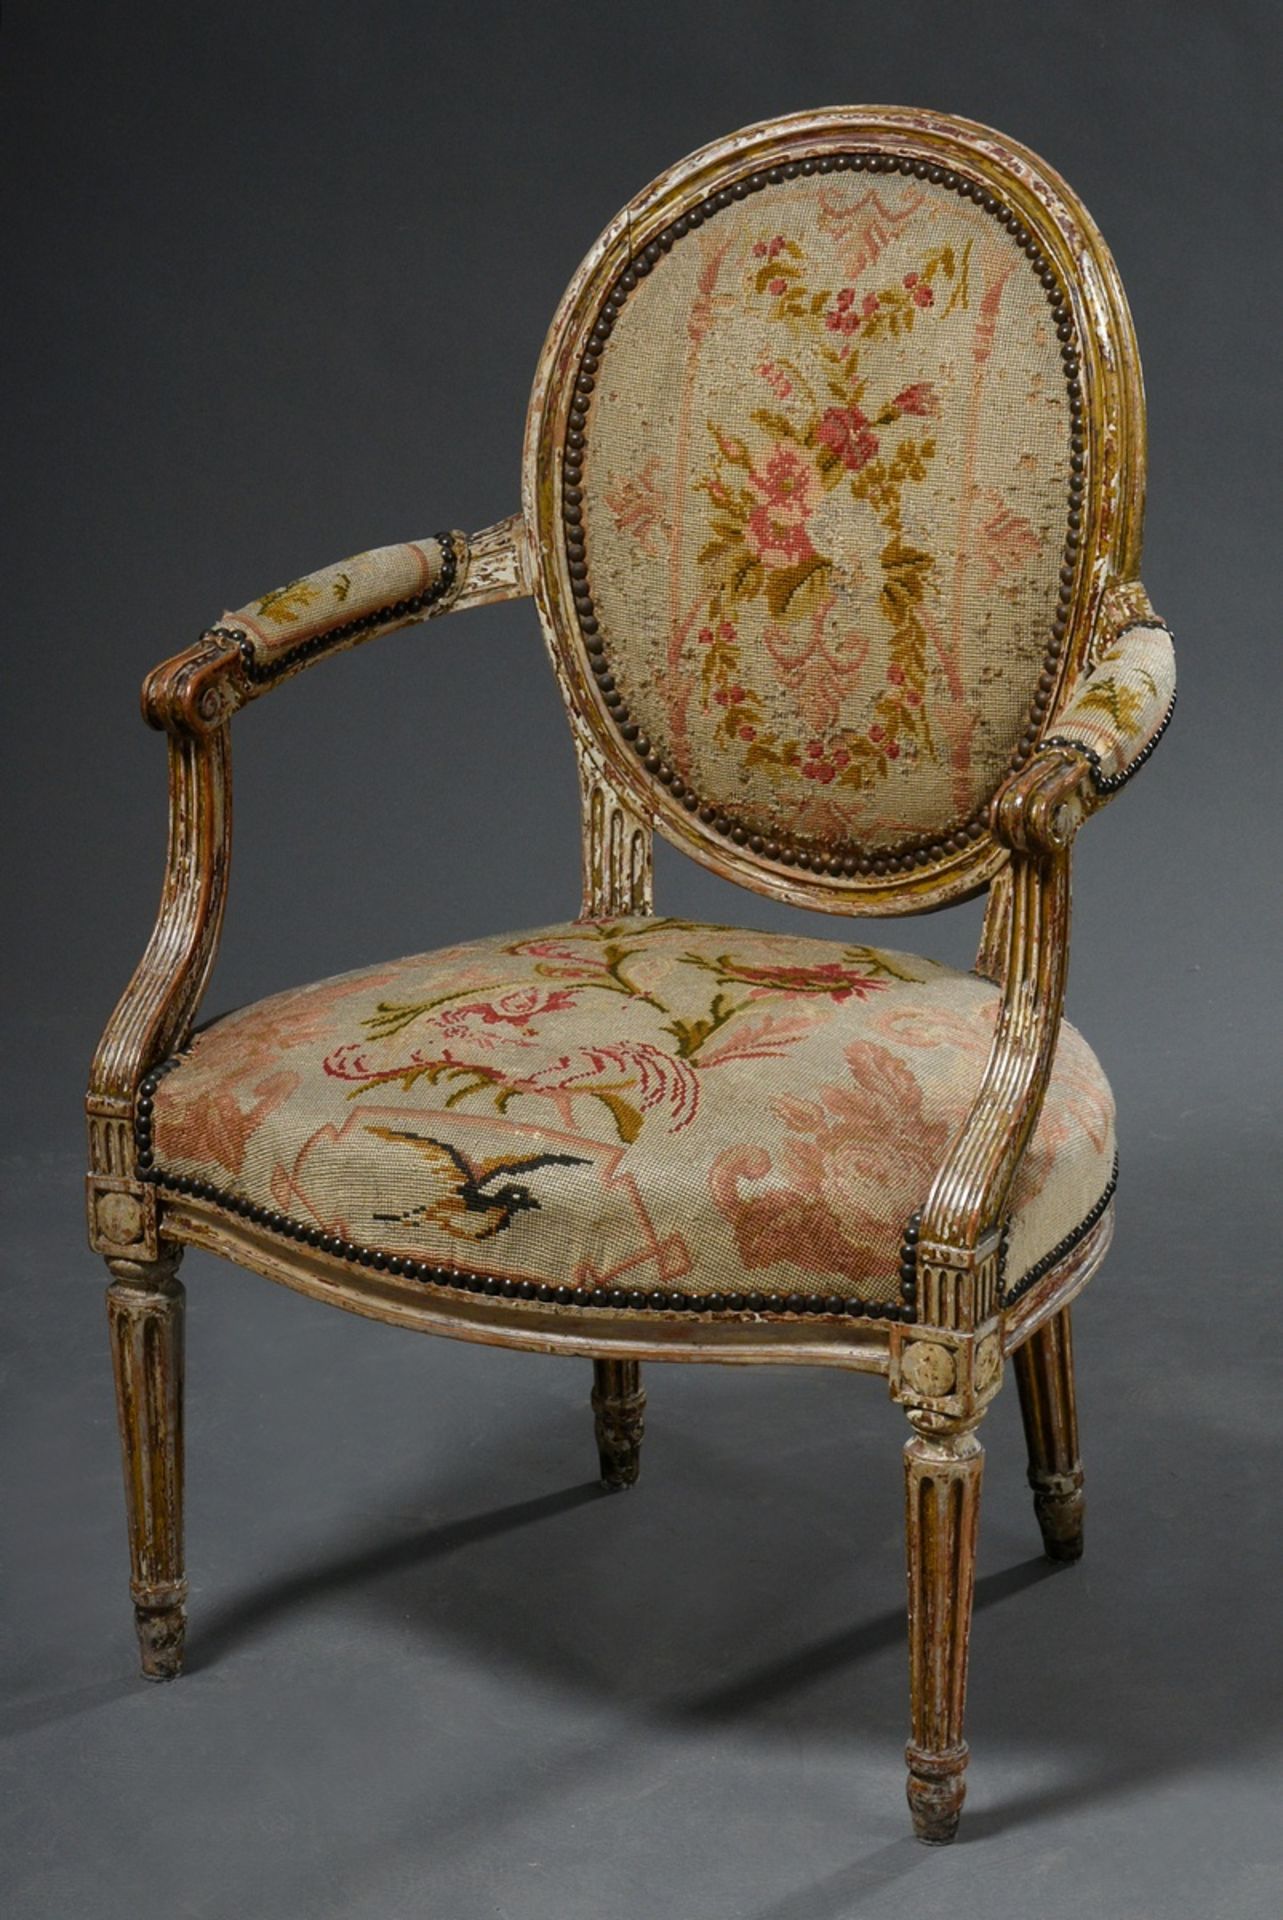 Louis XVI armchair with medallion back and fluted legs and floral embroidery cover, wood with remna - Image 2 of 6